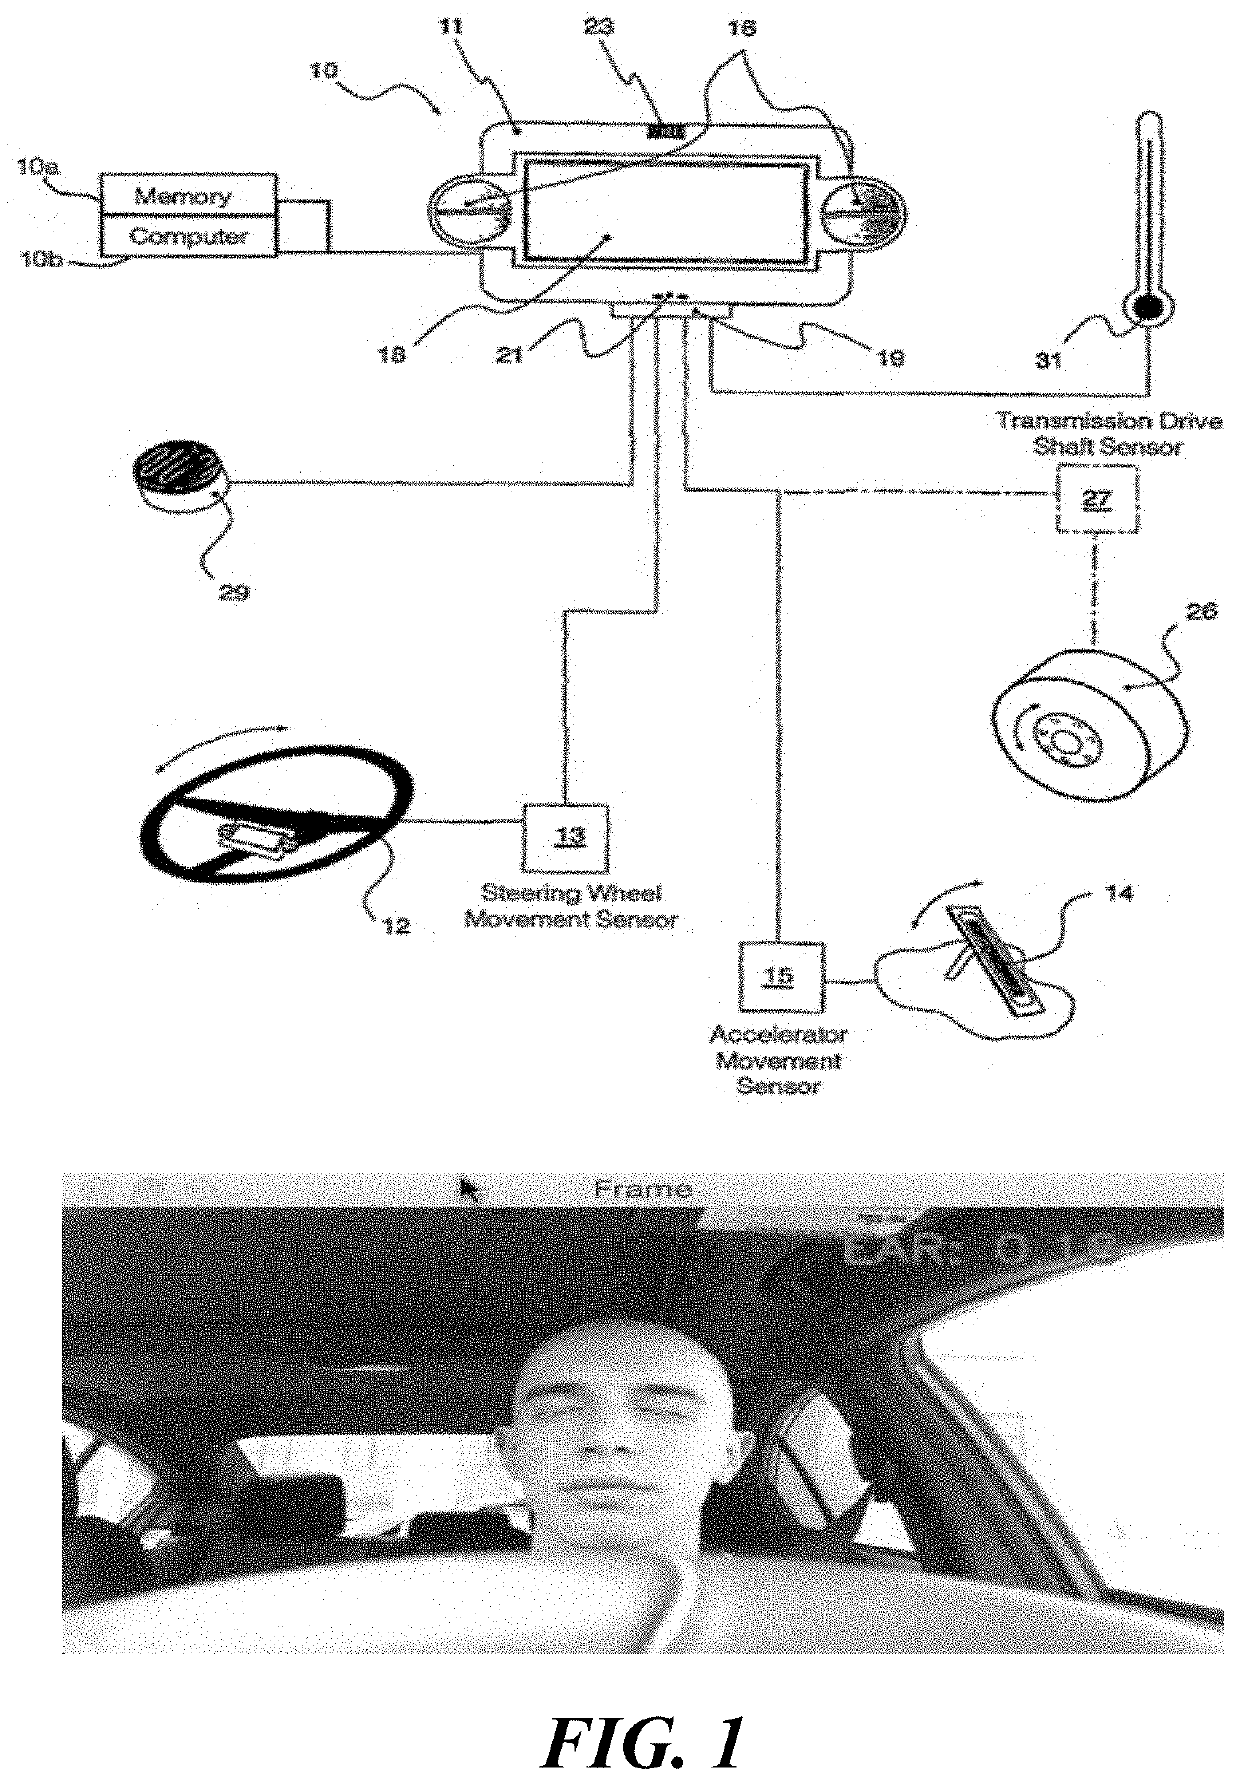 Car driver alcohol level and sleeping status detection and notification system